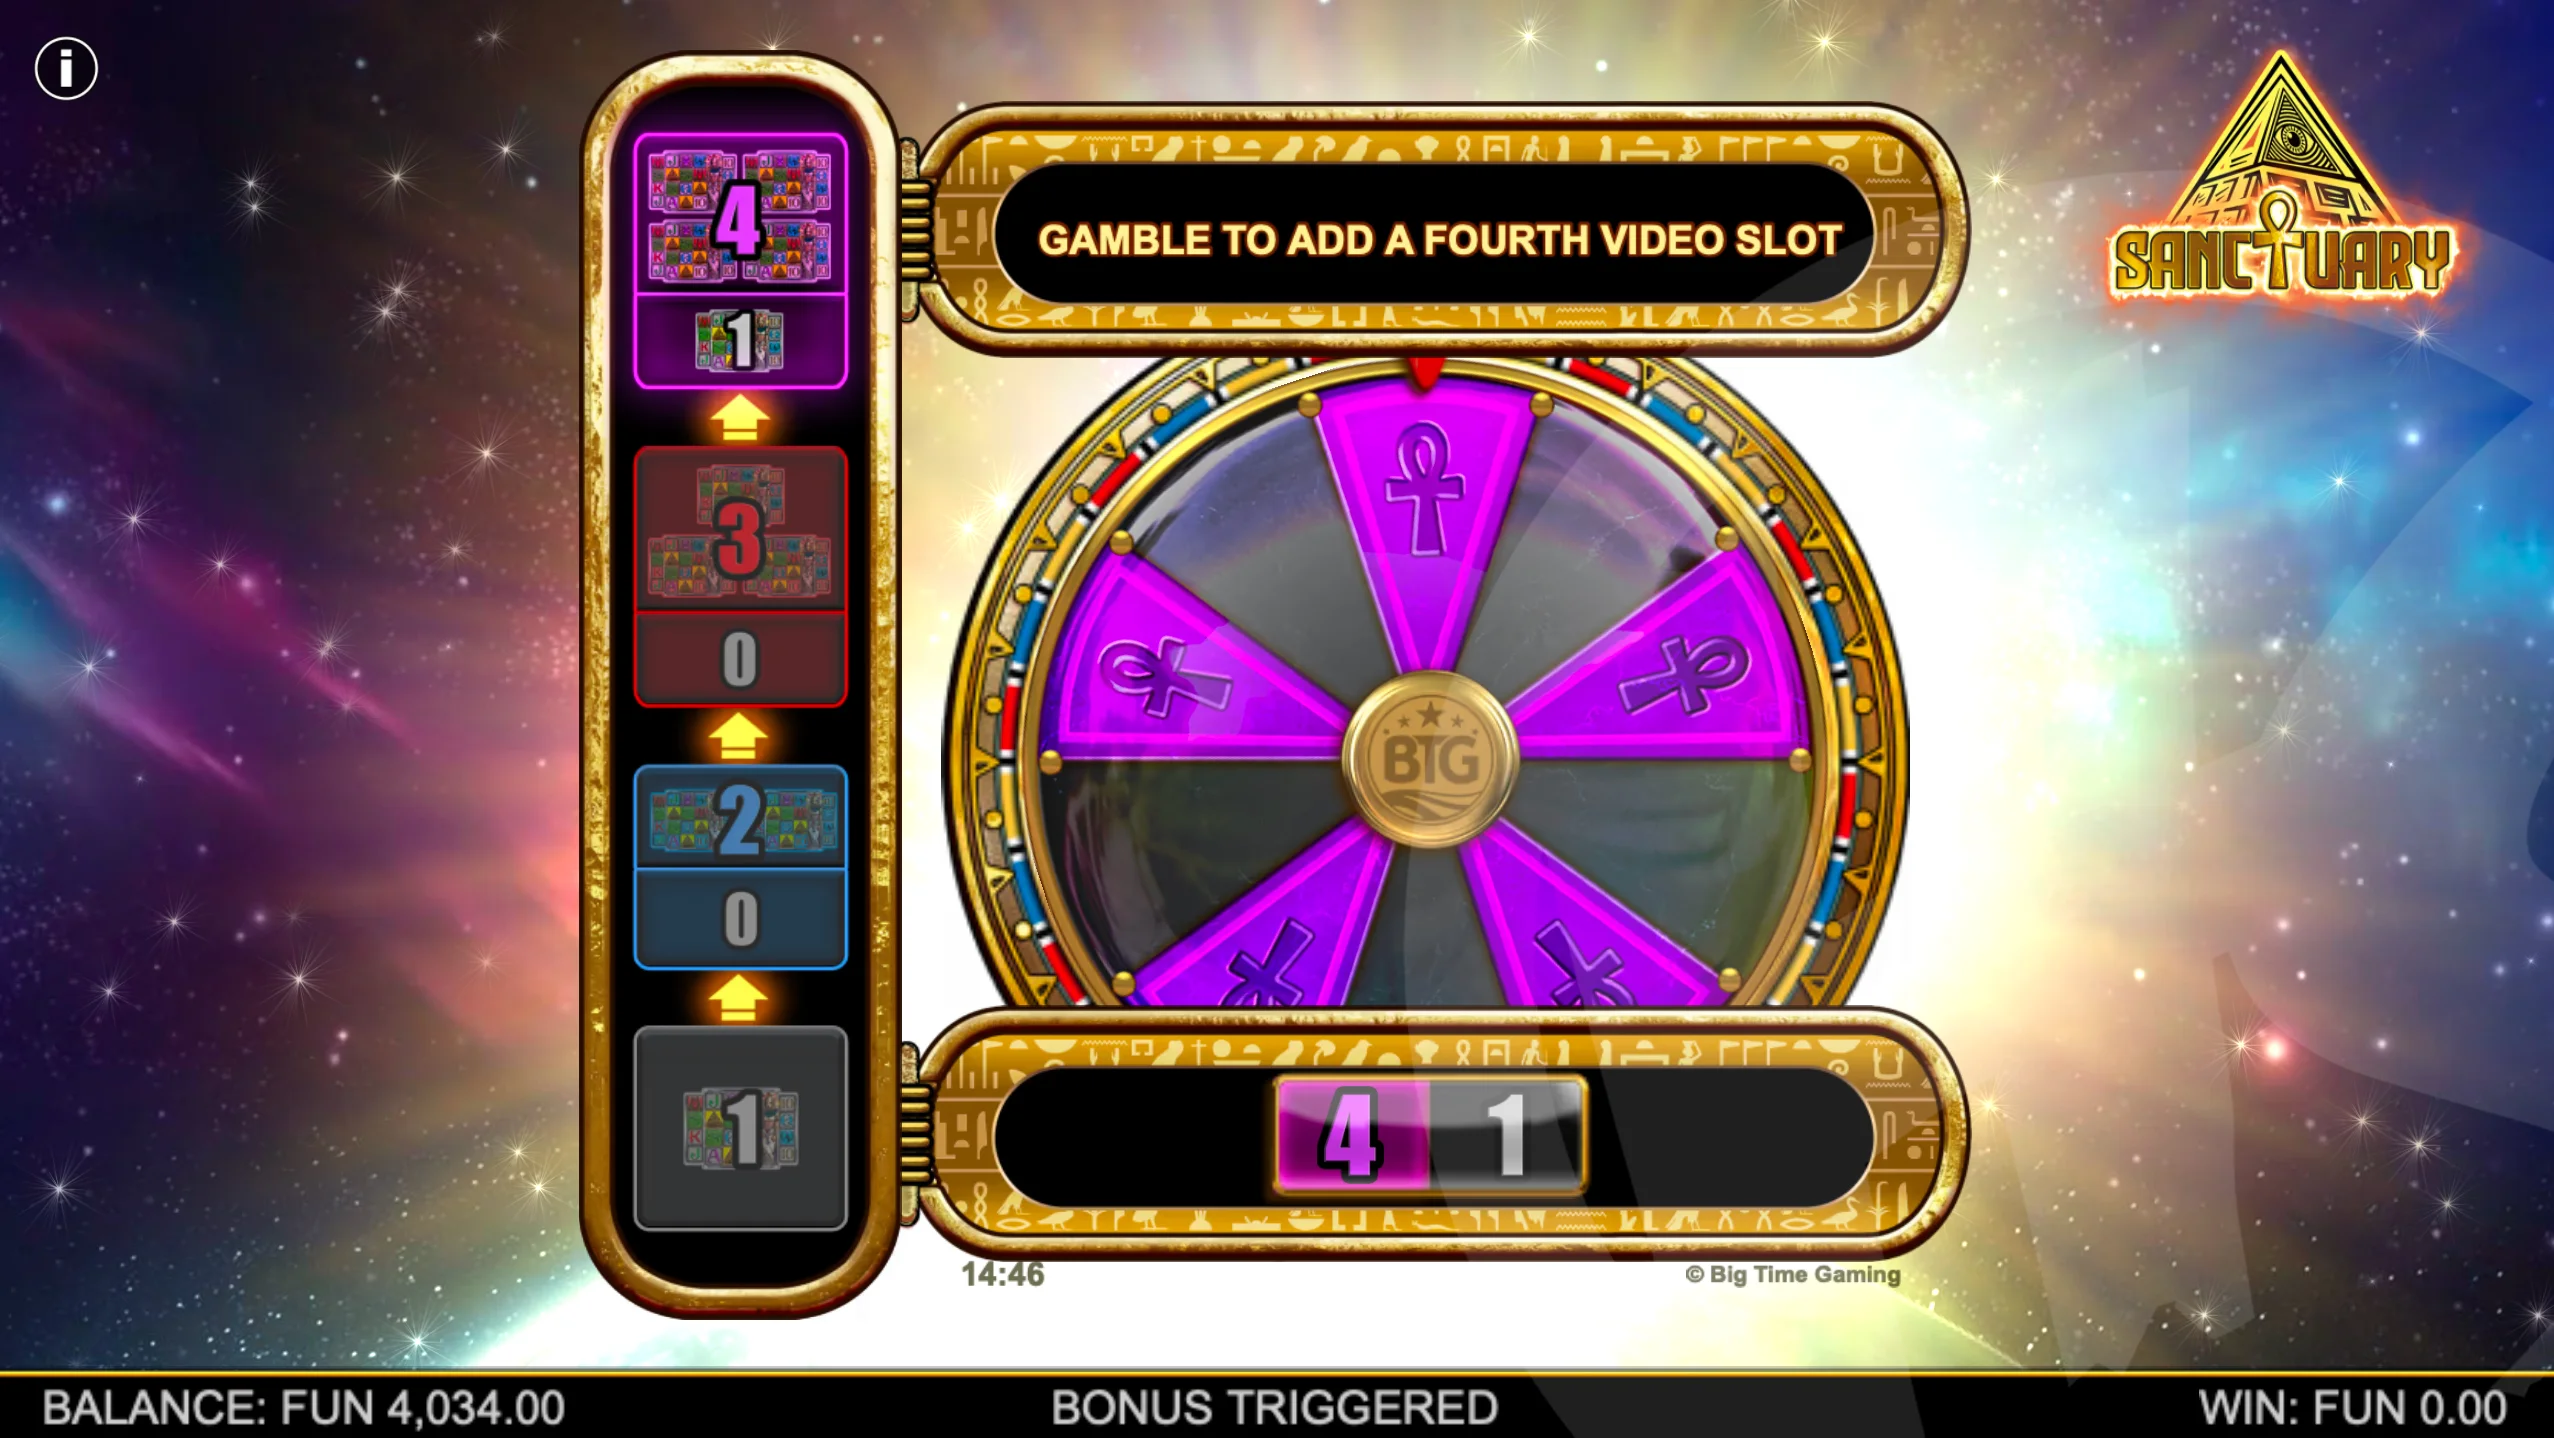 Gamble Up to 4 Video Slots Before Free Spins Begin